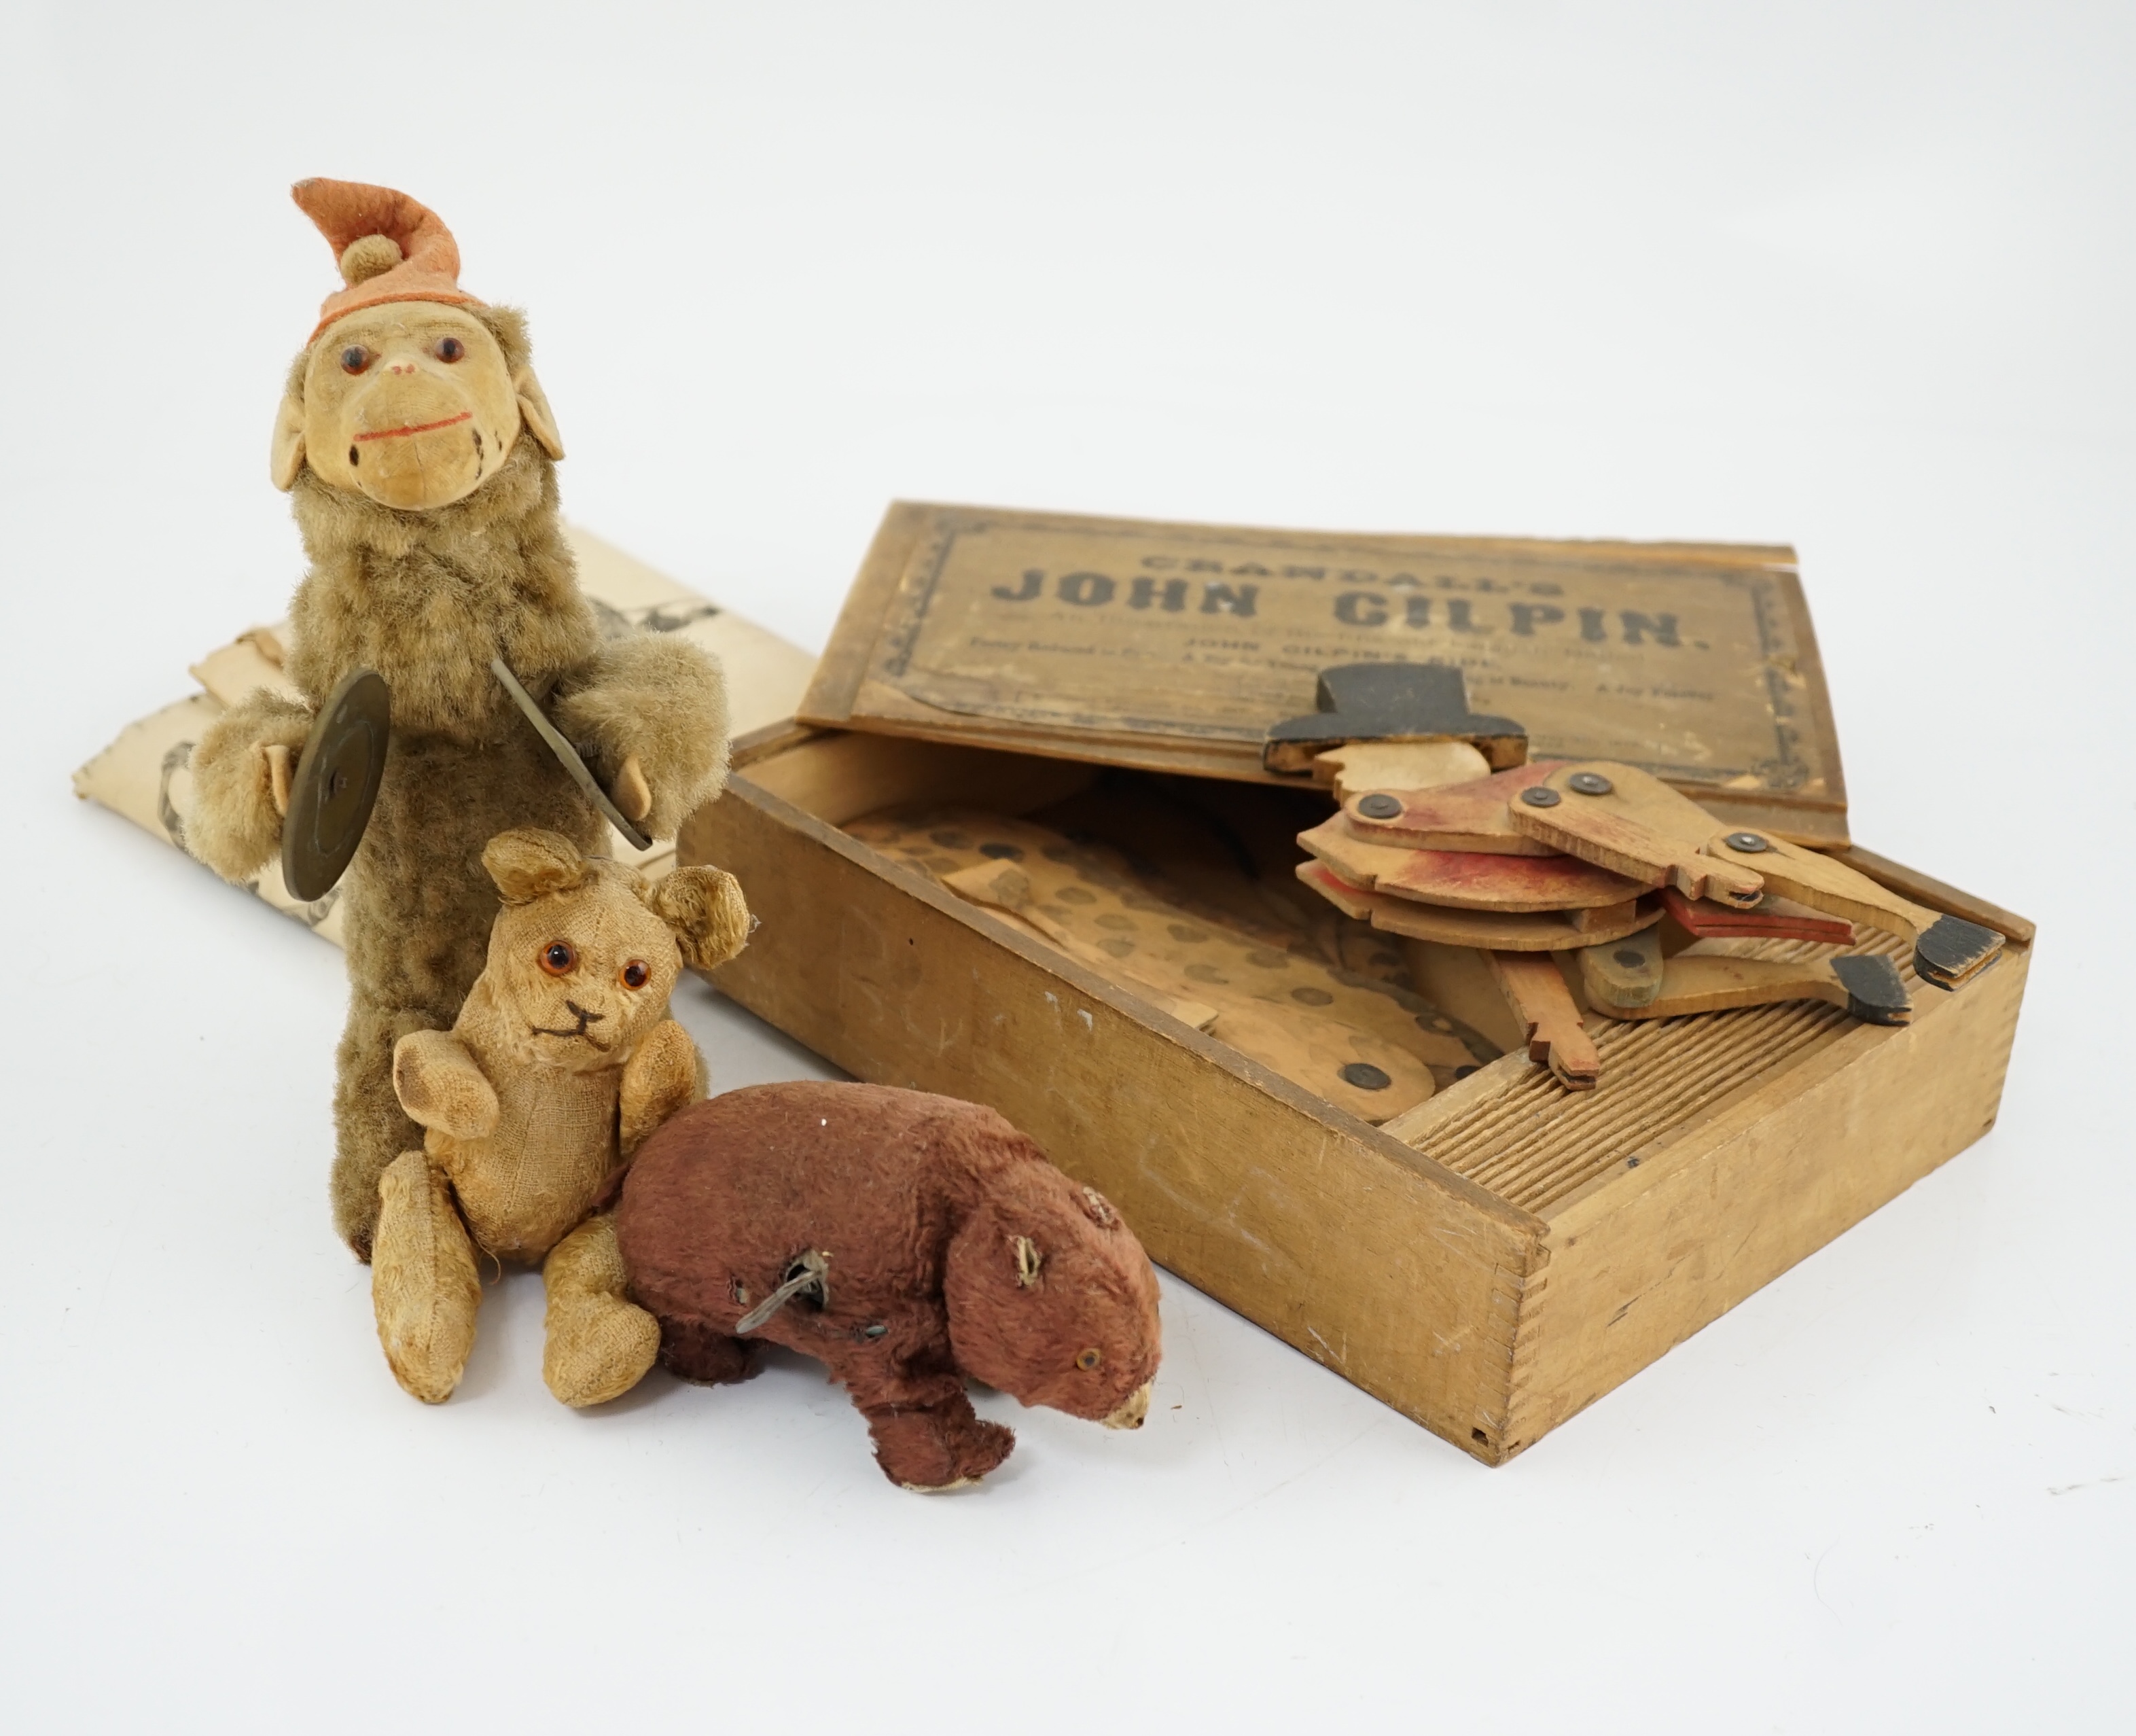 Grandall’s John Gilphin’s toy c.1876, with paperwork and original box, horse and rider and three toys